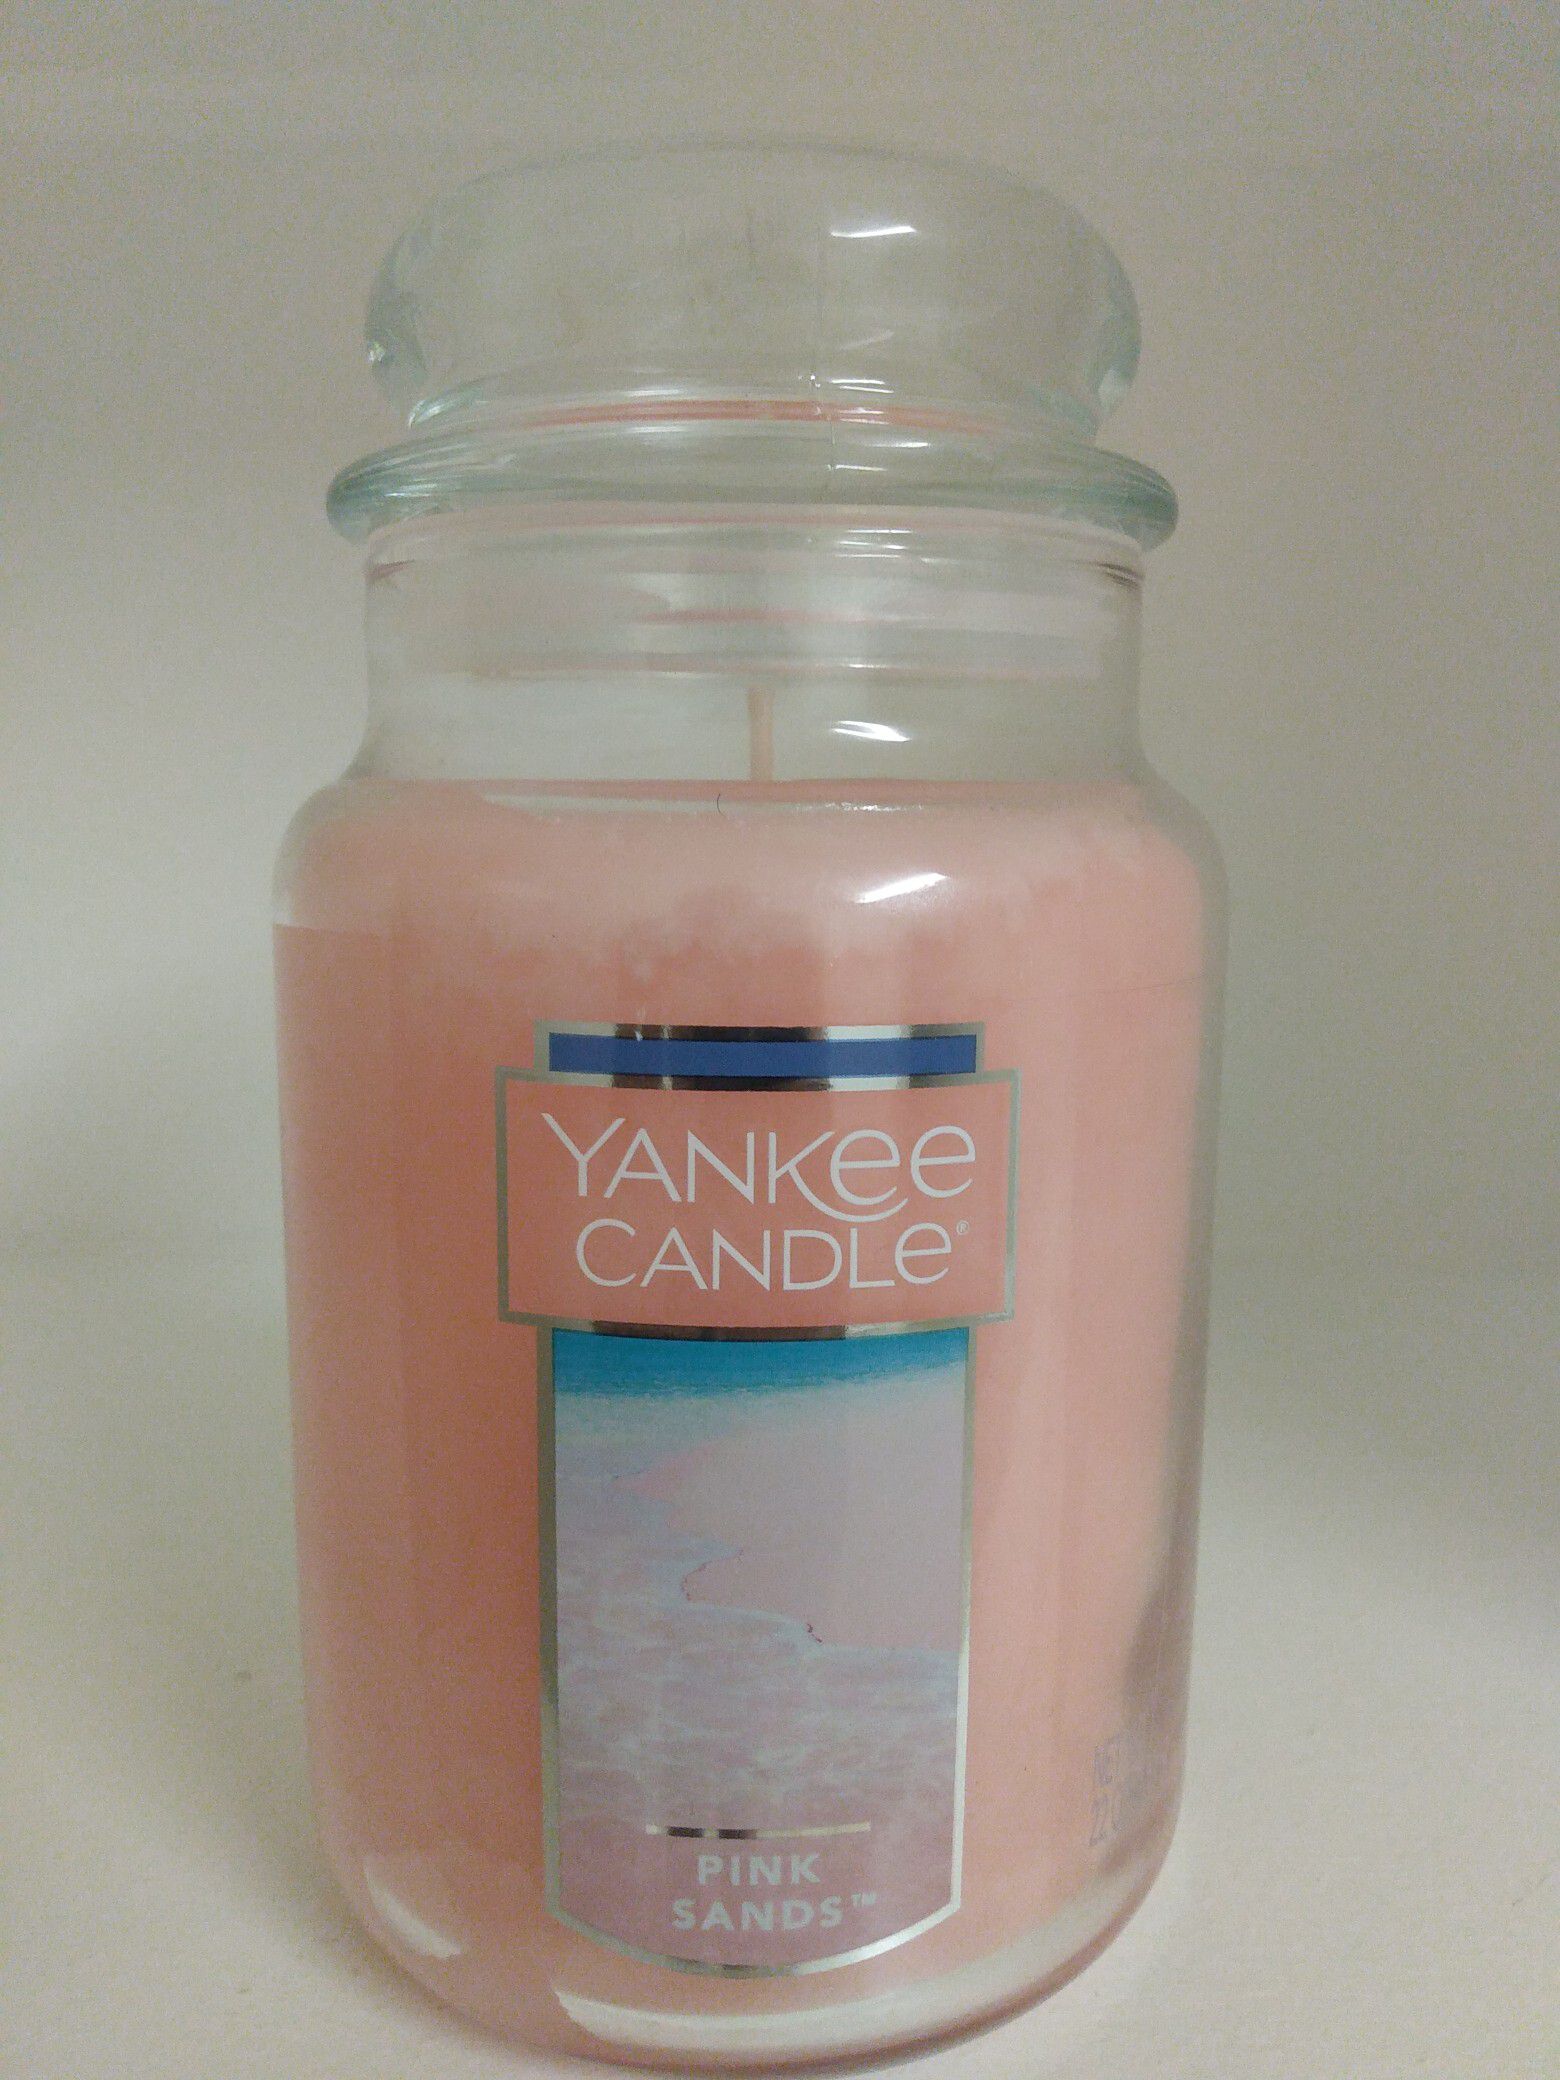 PINK SANDS YANKEE CANDLE(22oz)